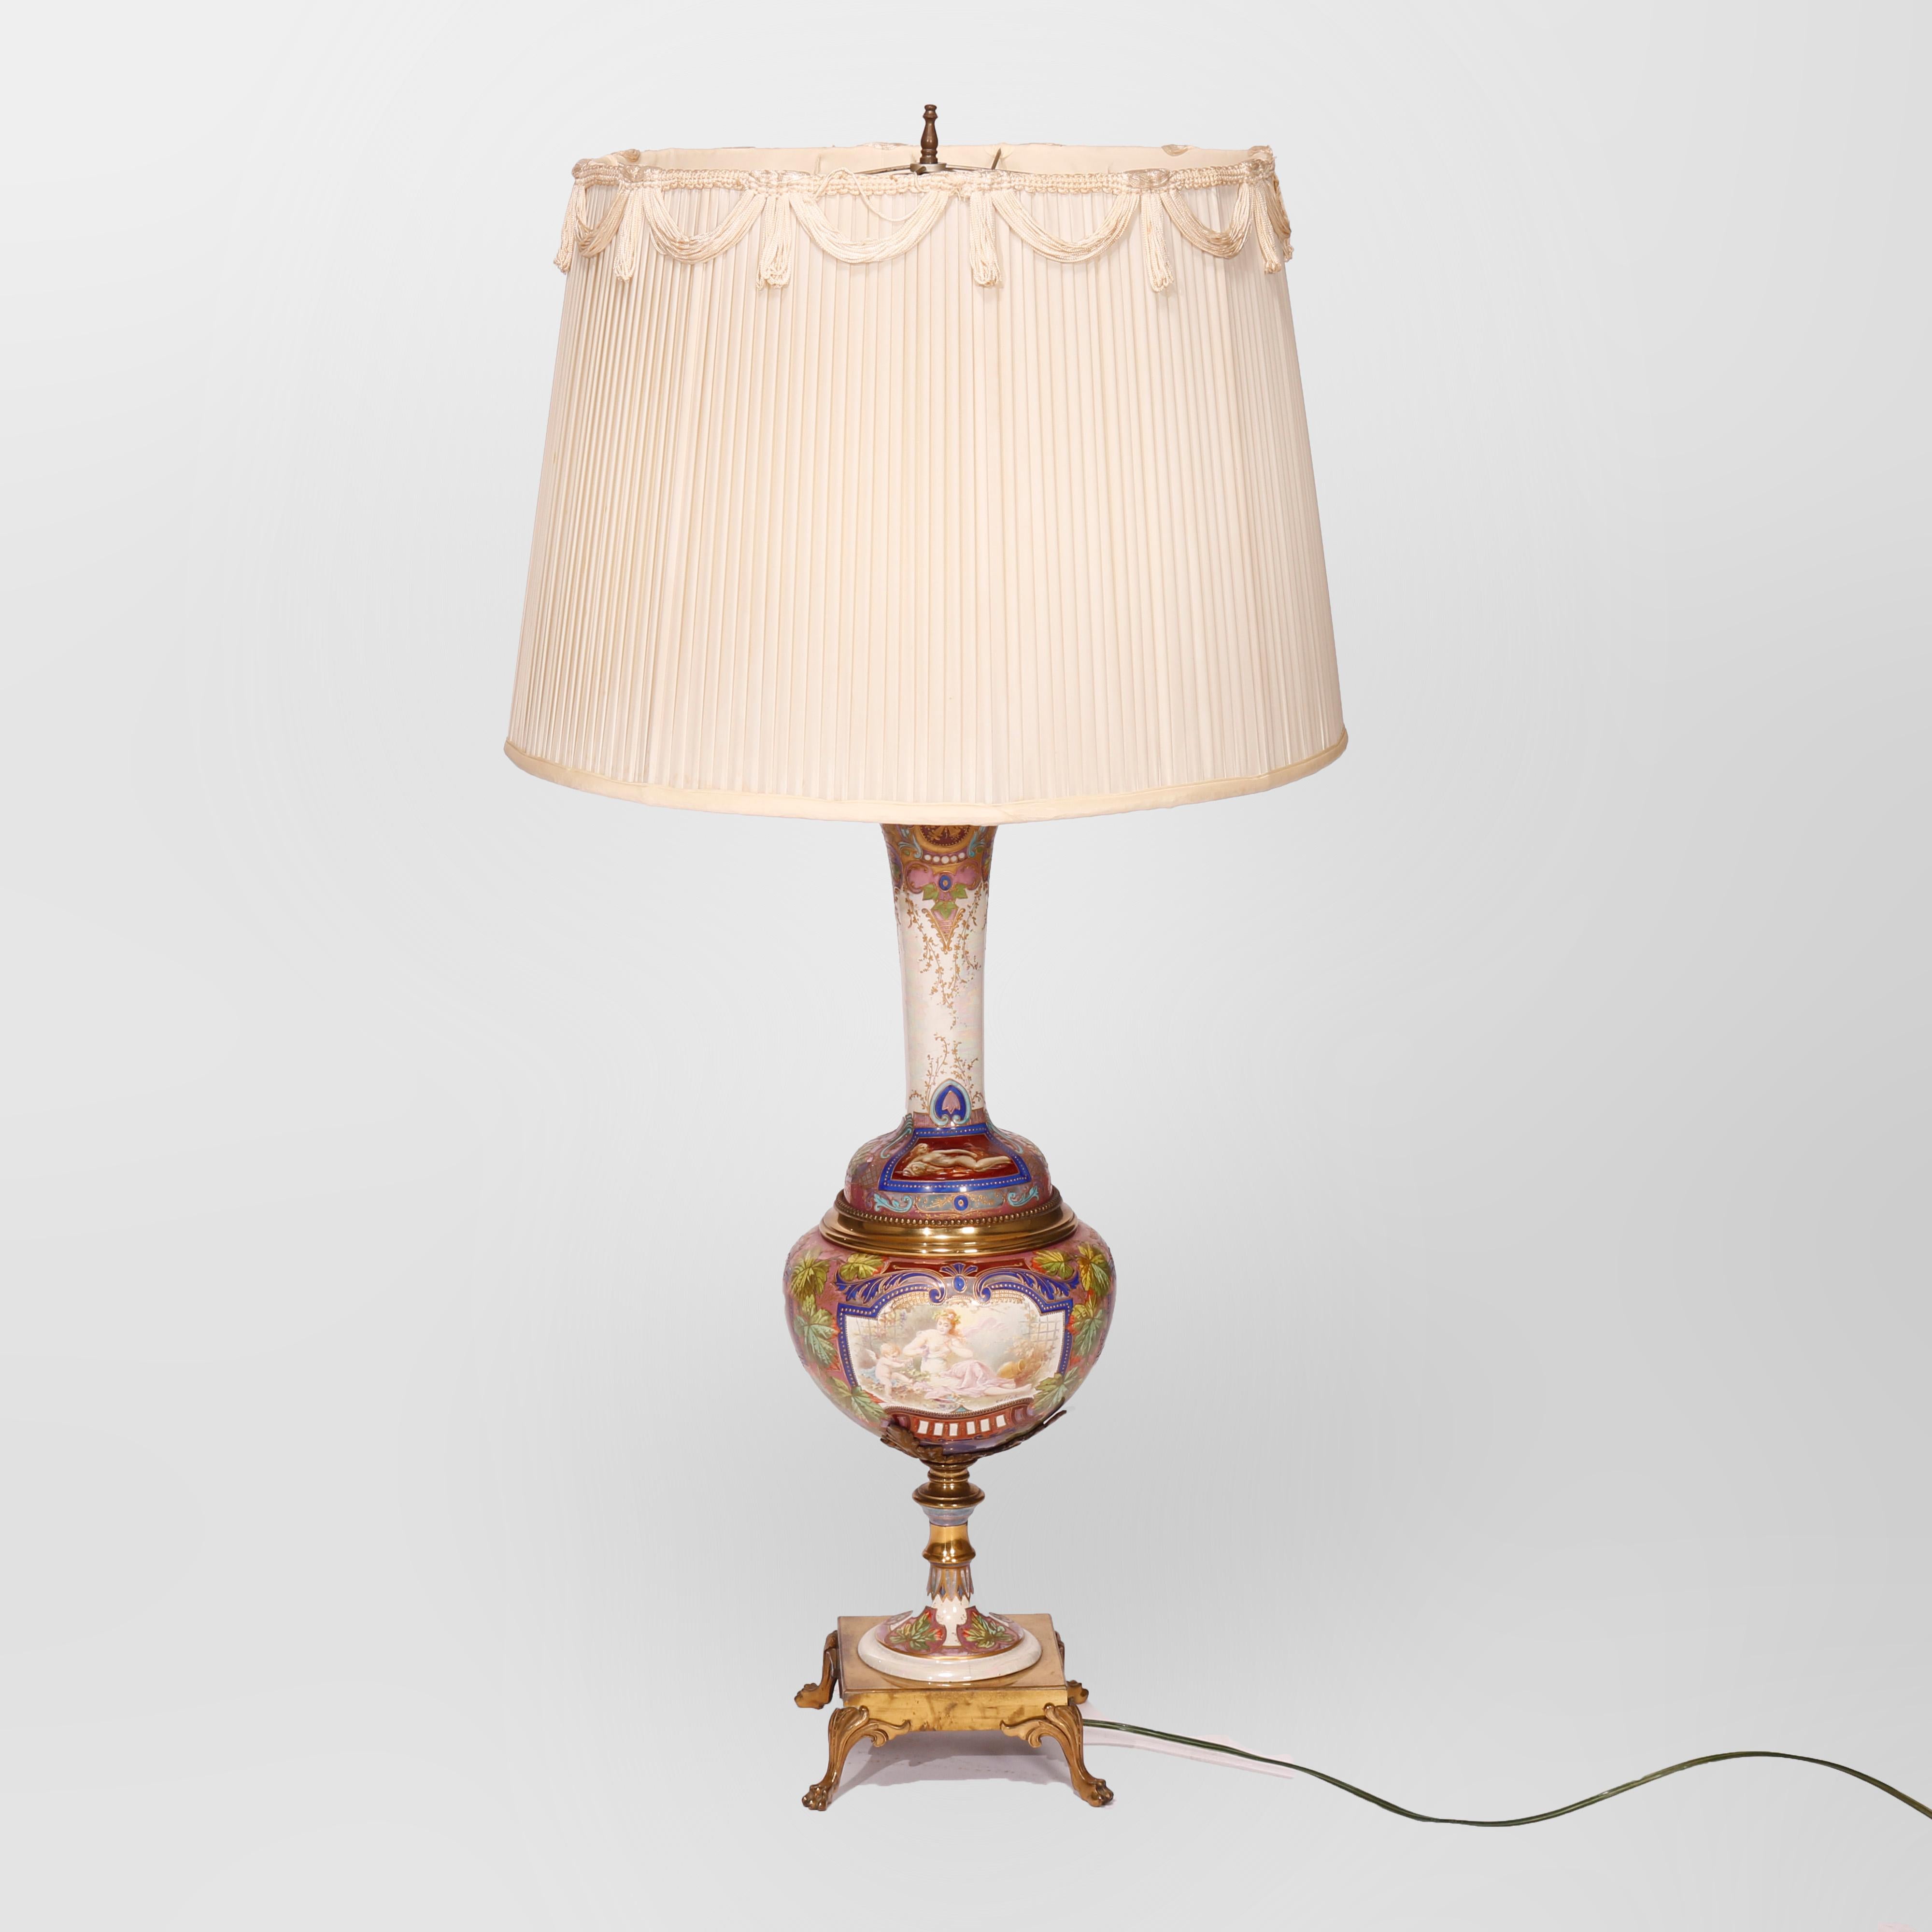 An antique and large Royal Vienna double socket table lamp offers porcelain urn with hand painted panels of Classical women and cherubs, gilt highlights throughout, raised on cast footed base, c1880

Measures: Lamp 41.25''H X 8''W X 8''D; shade